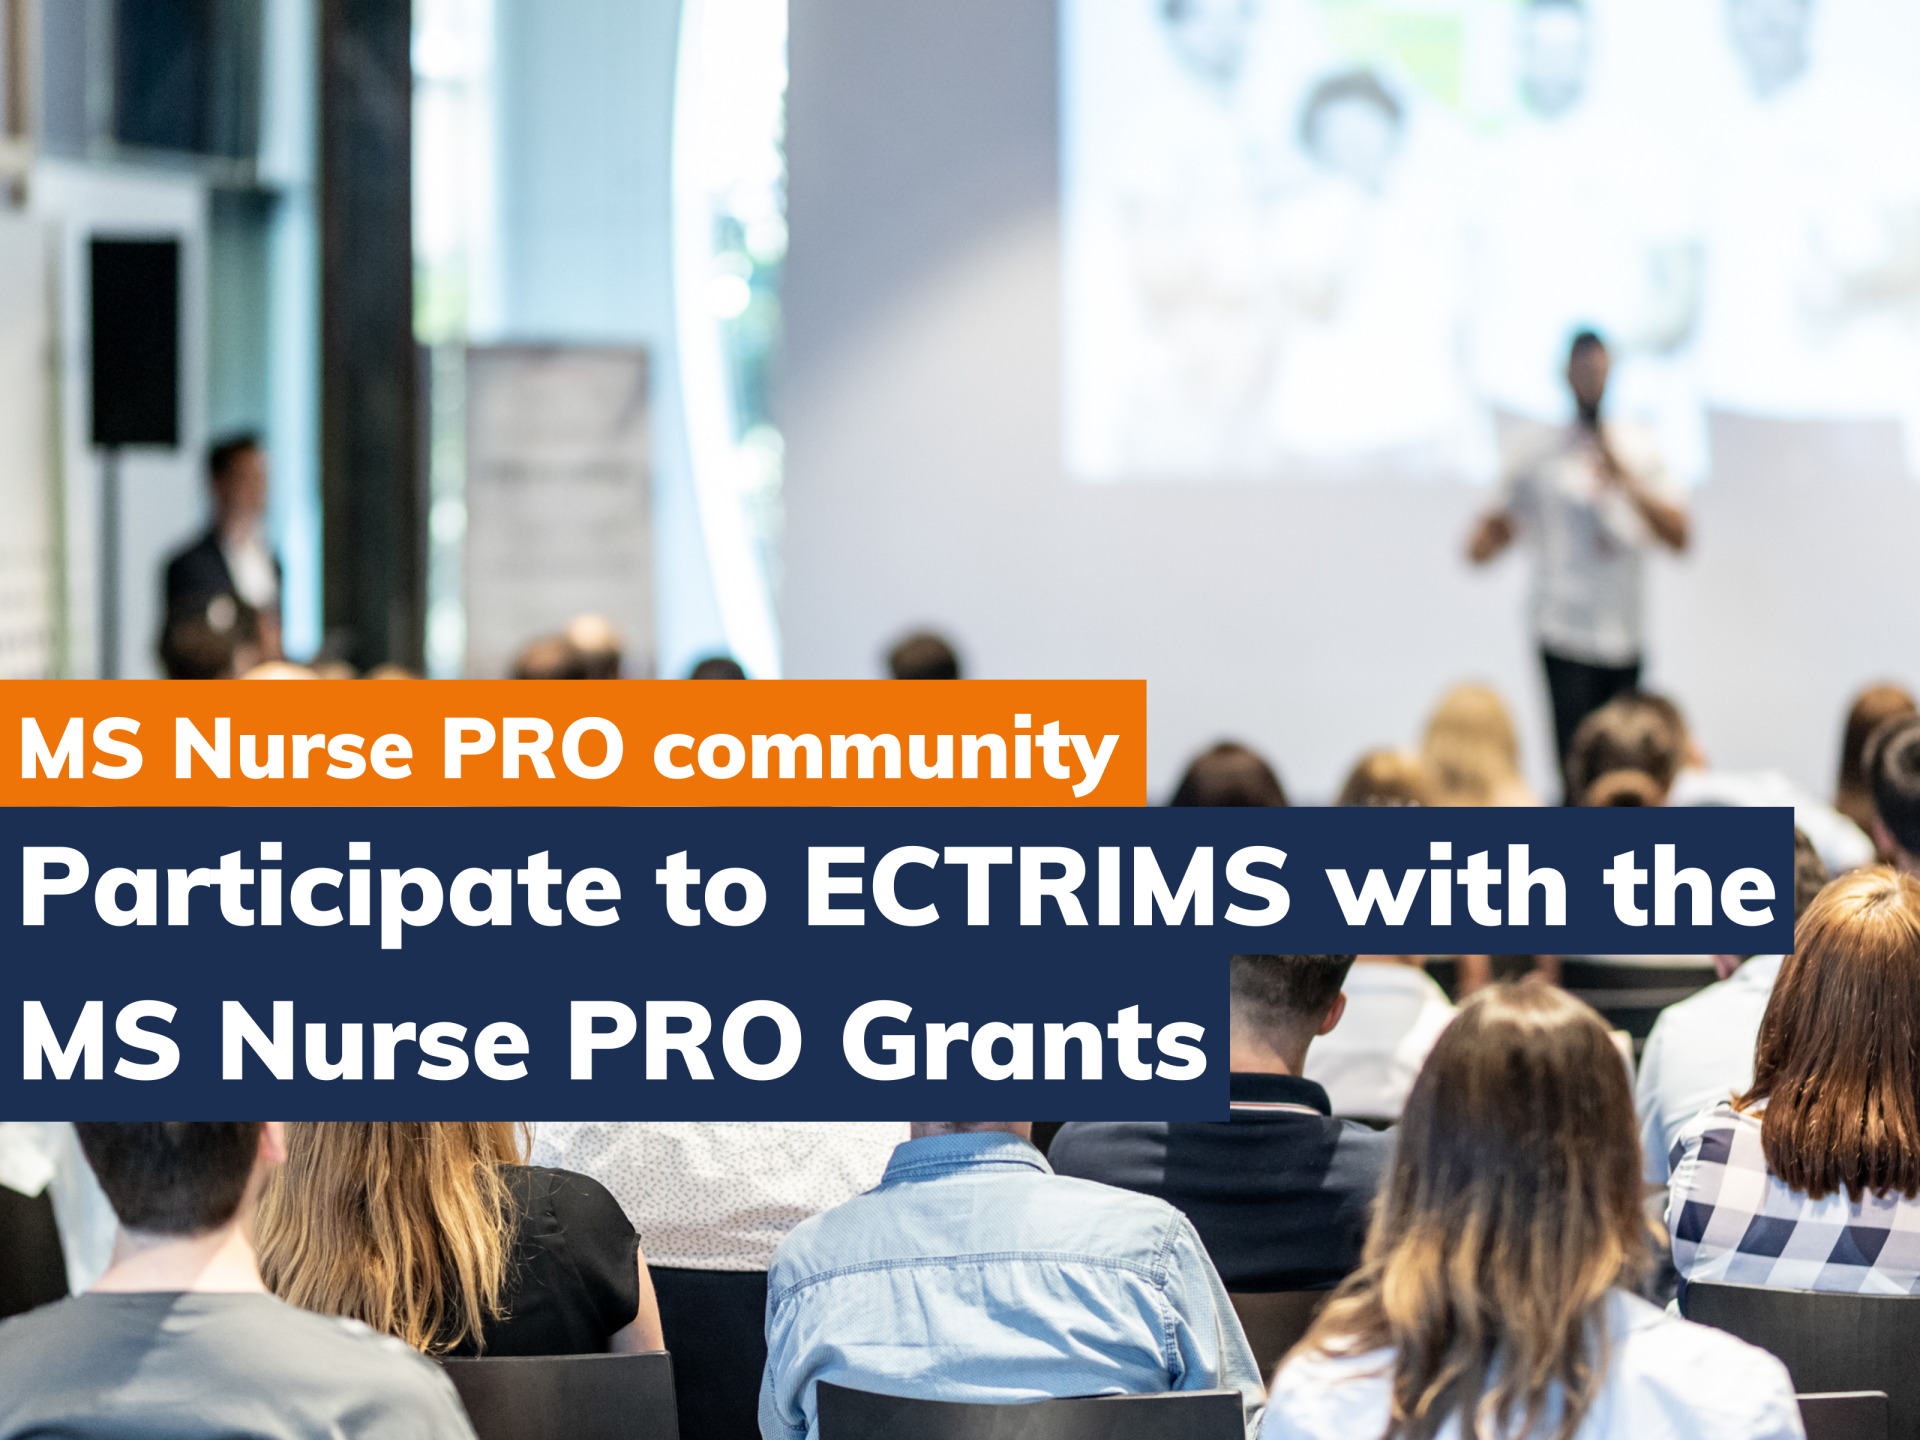 Seize the opportunity to participate to ECTRIMS 2023 with the MS Nurse PRO Grants